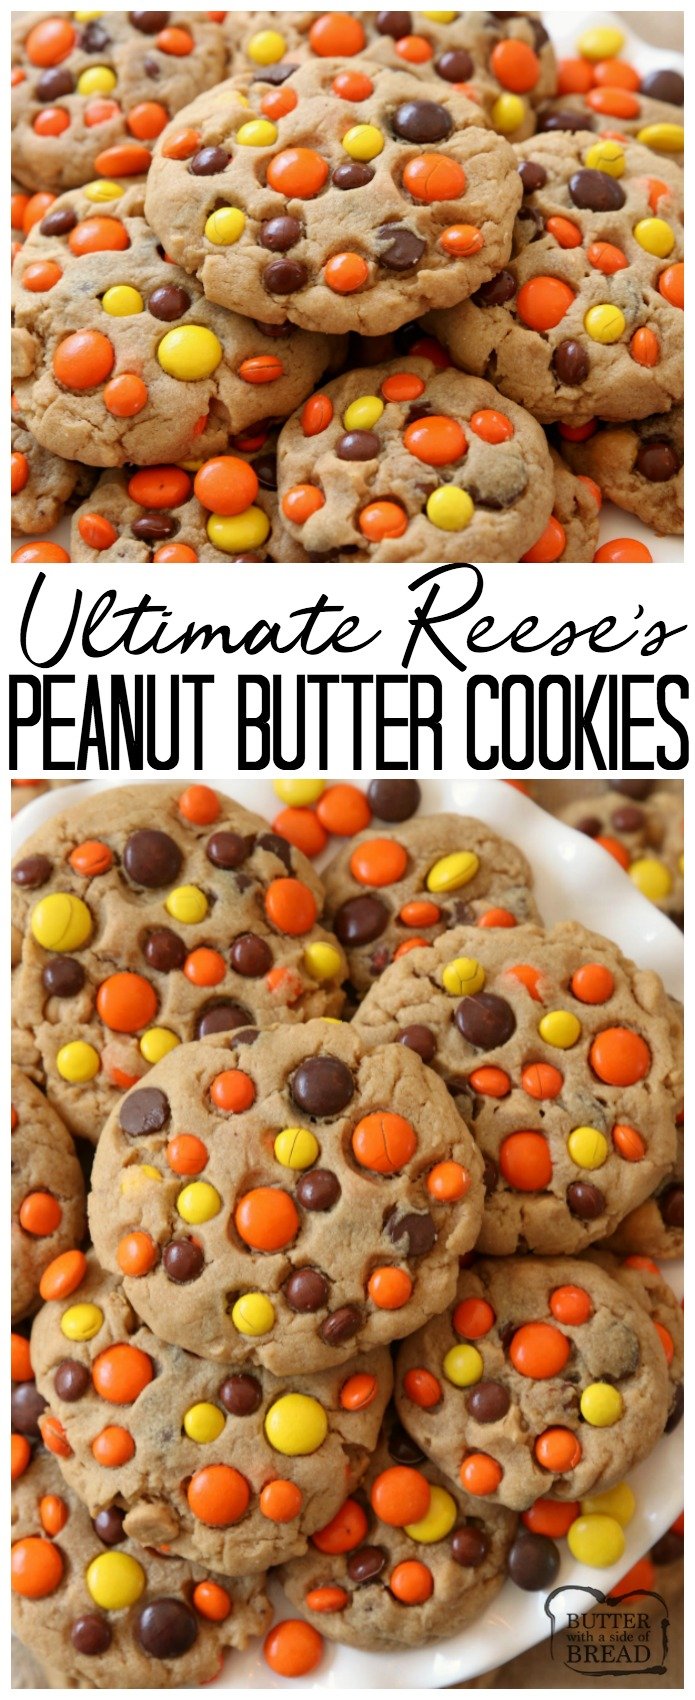 Best Ever Reese's Peanut Butter Cookies recipe made with a full cup of peanut butter! We added chocolate chips plus peanut butter chips & Reese's Pieces to our favorite peanut butter cookie recipe to get the ULTIMATE chocolate peanut butter cookies! #Cookie #recipe from Butter With A Side of Bread #Reeses #peanutbutter #food #dessert